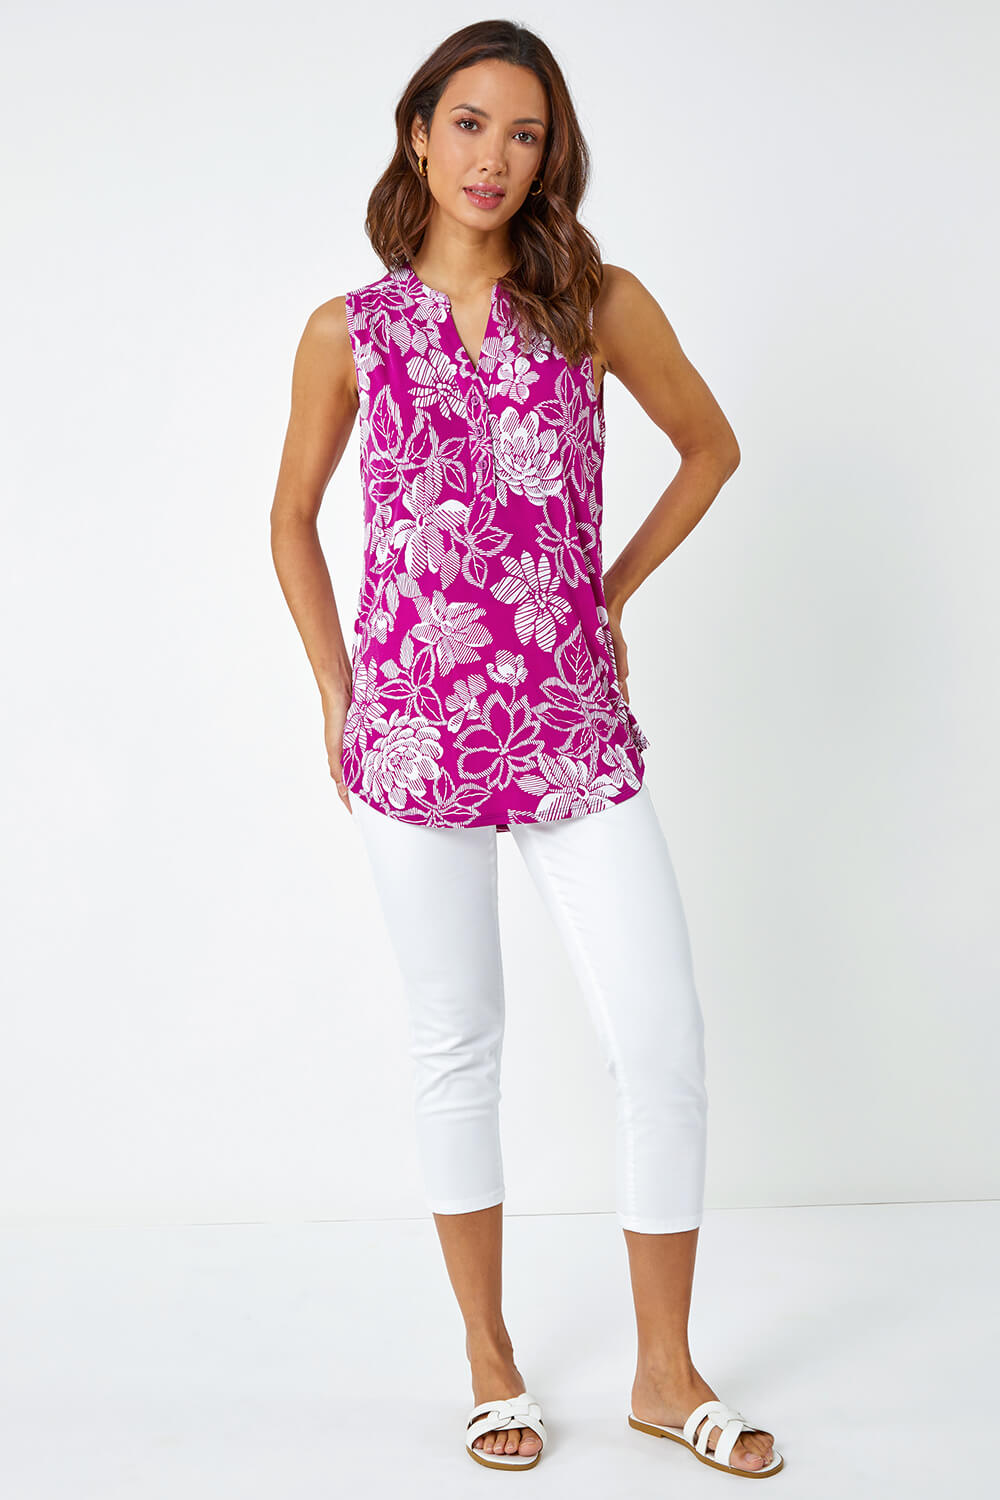 MAGENTA Textured Floral Print Sleeveless Top, Image 2 of 5